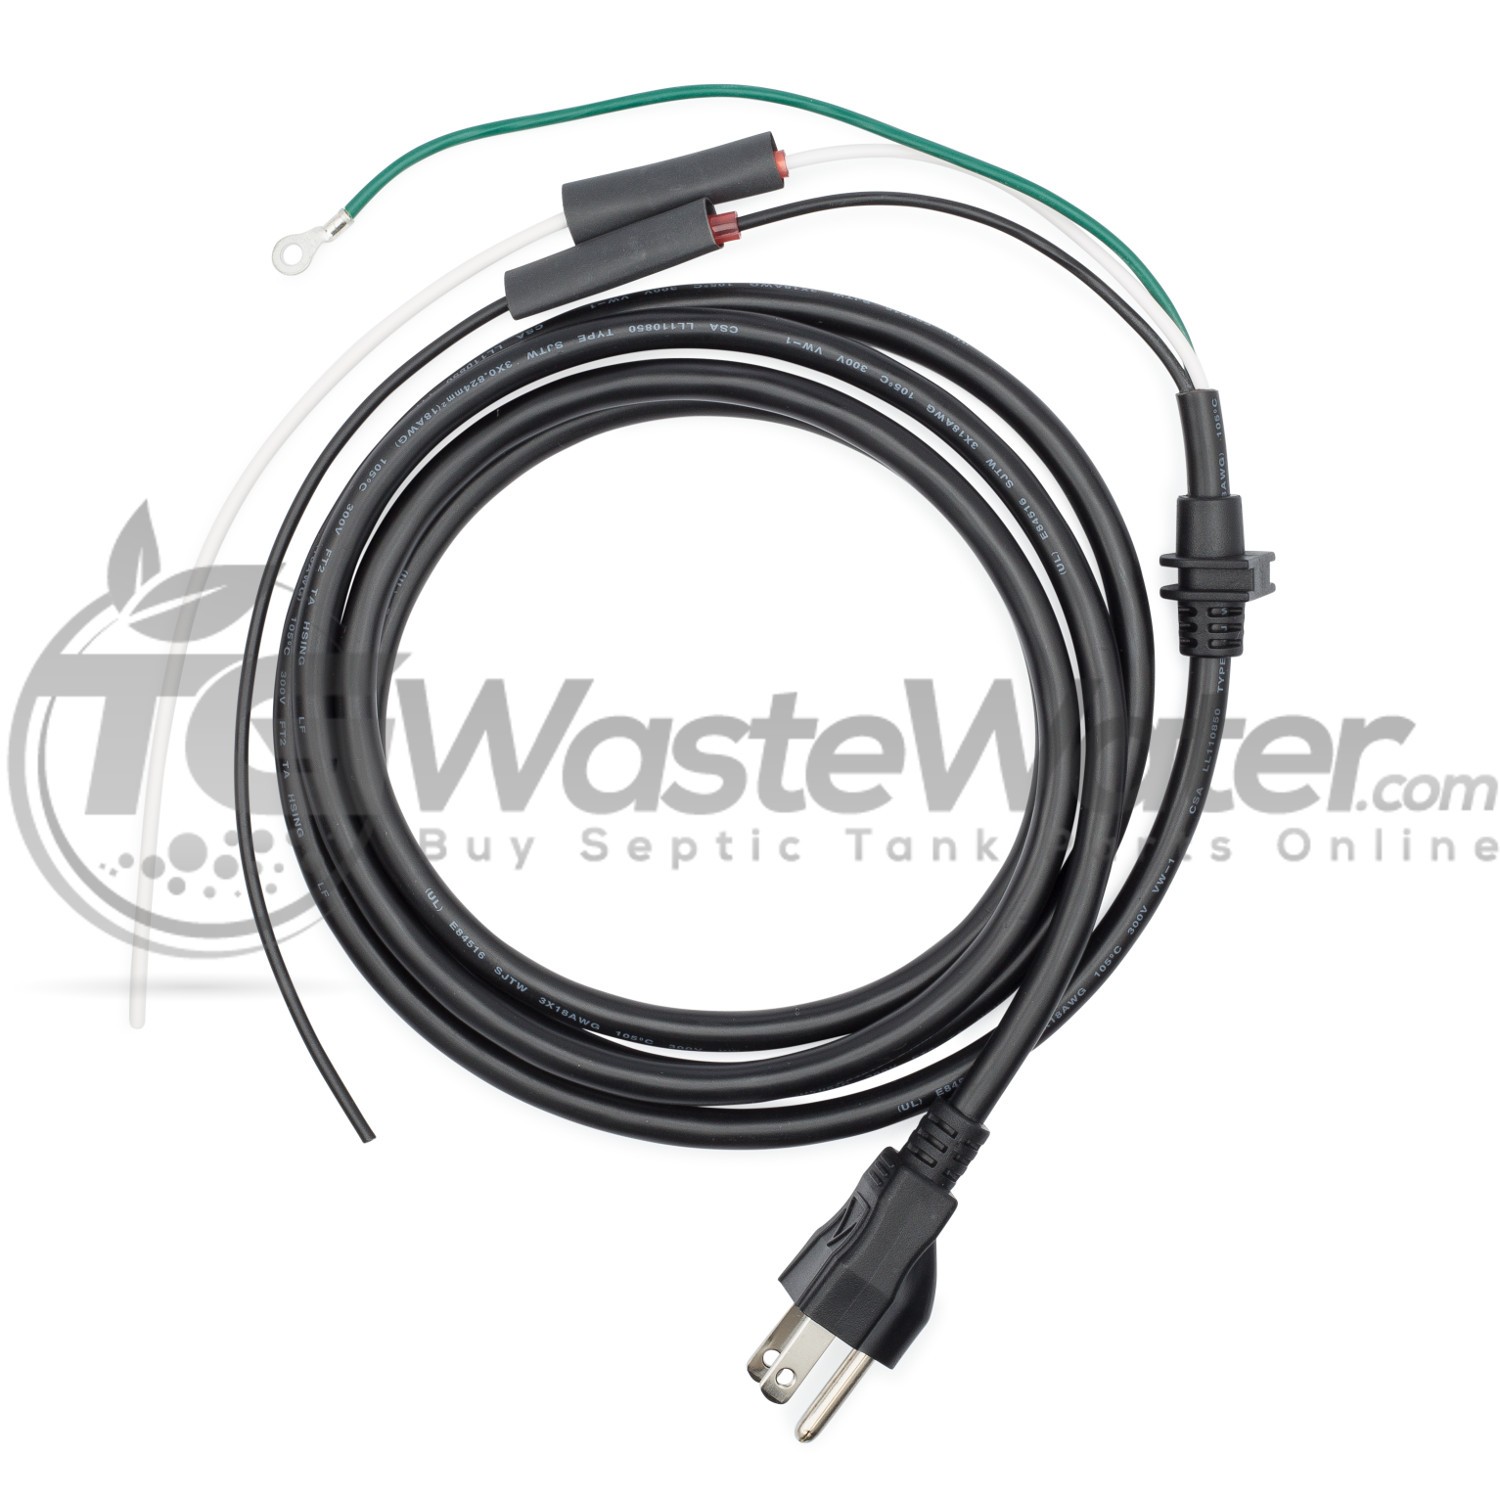 Hiblow HP-60, HP-80 Replacement Power Cord